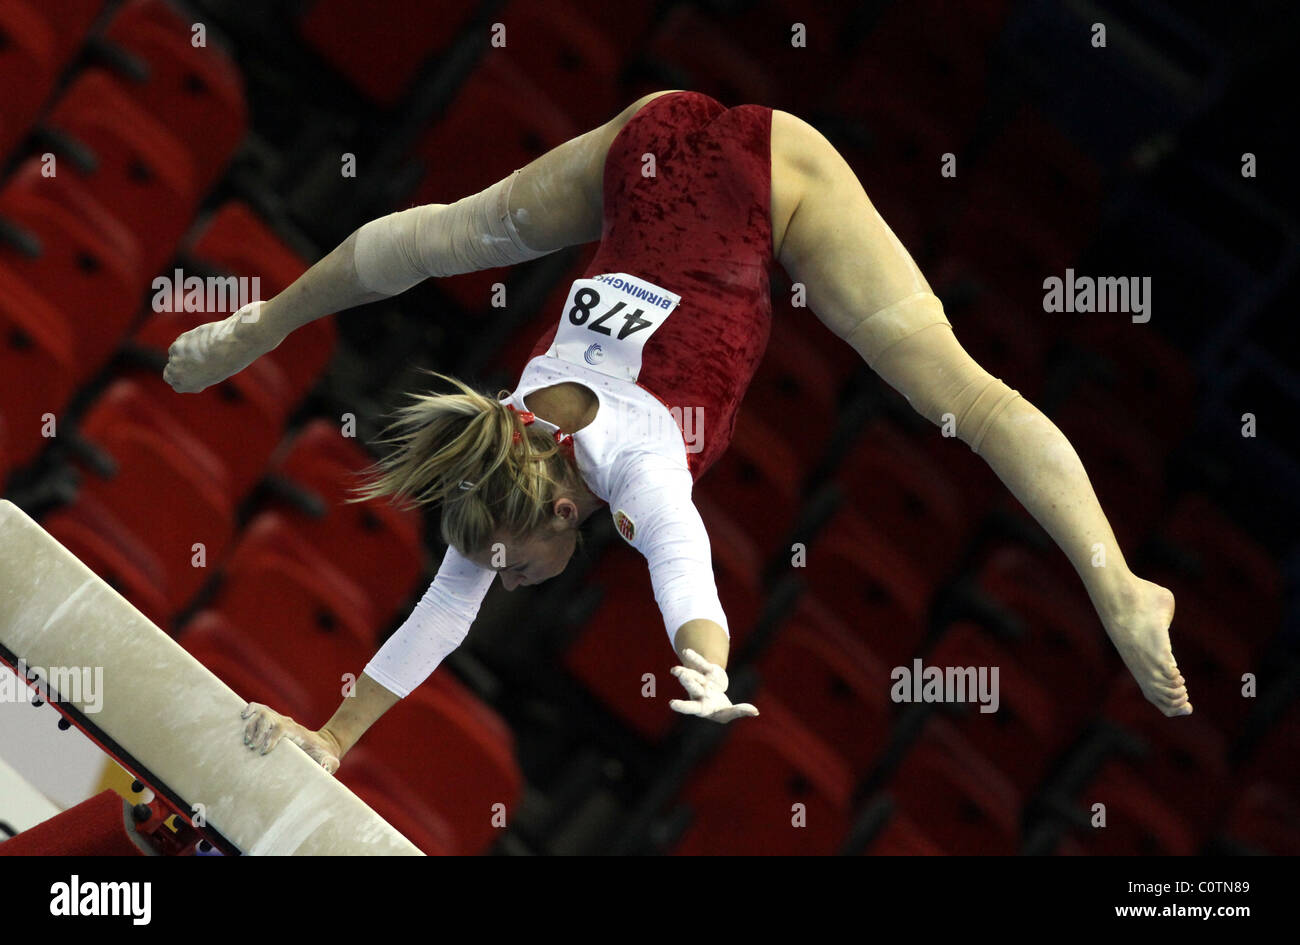 Female Gymnast performs a handstand using only one arm on beam at a gymnastics competition Stock Photo